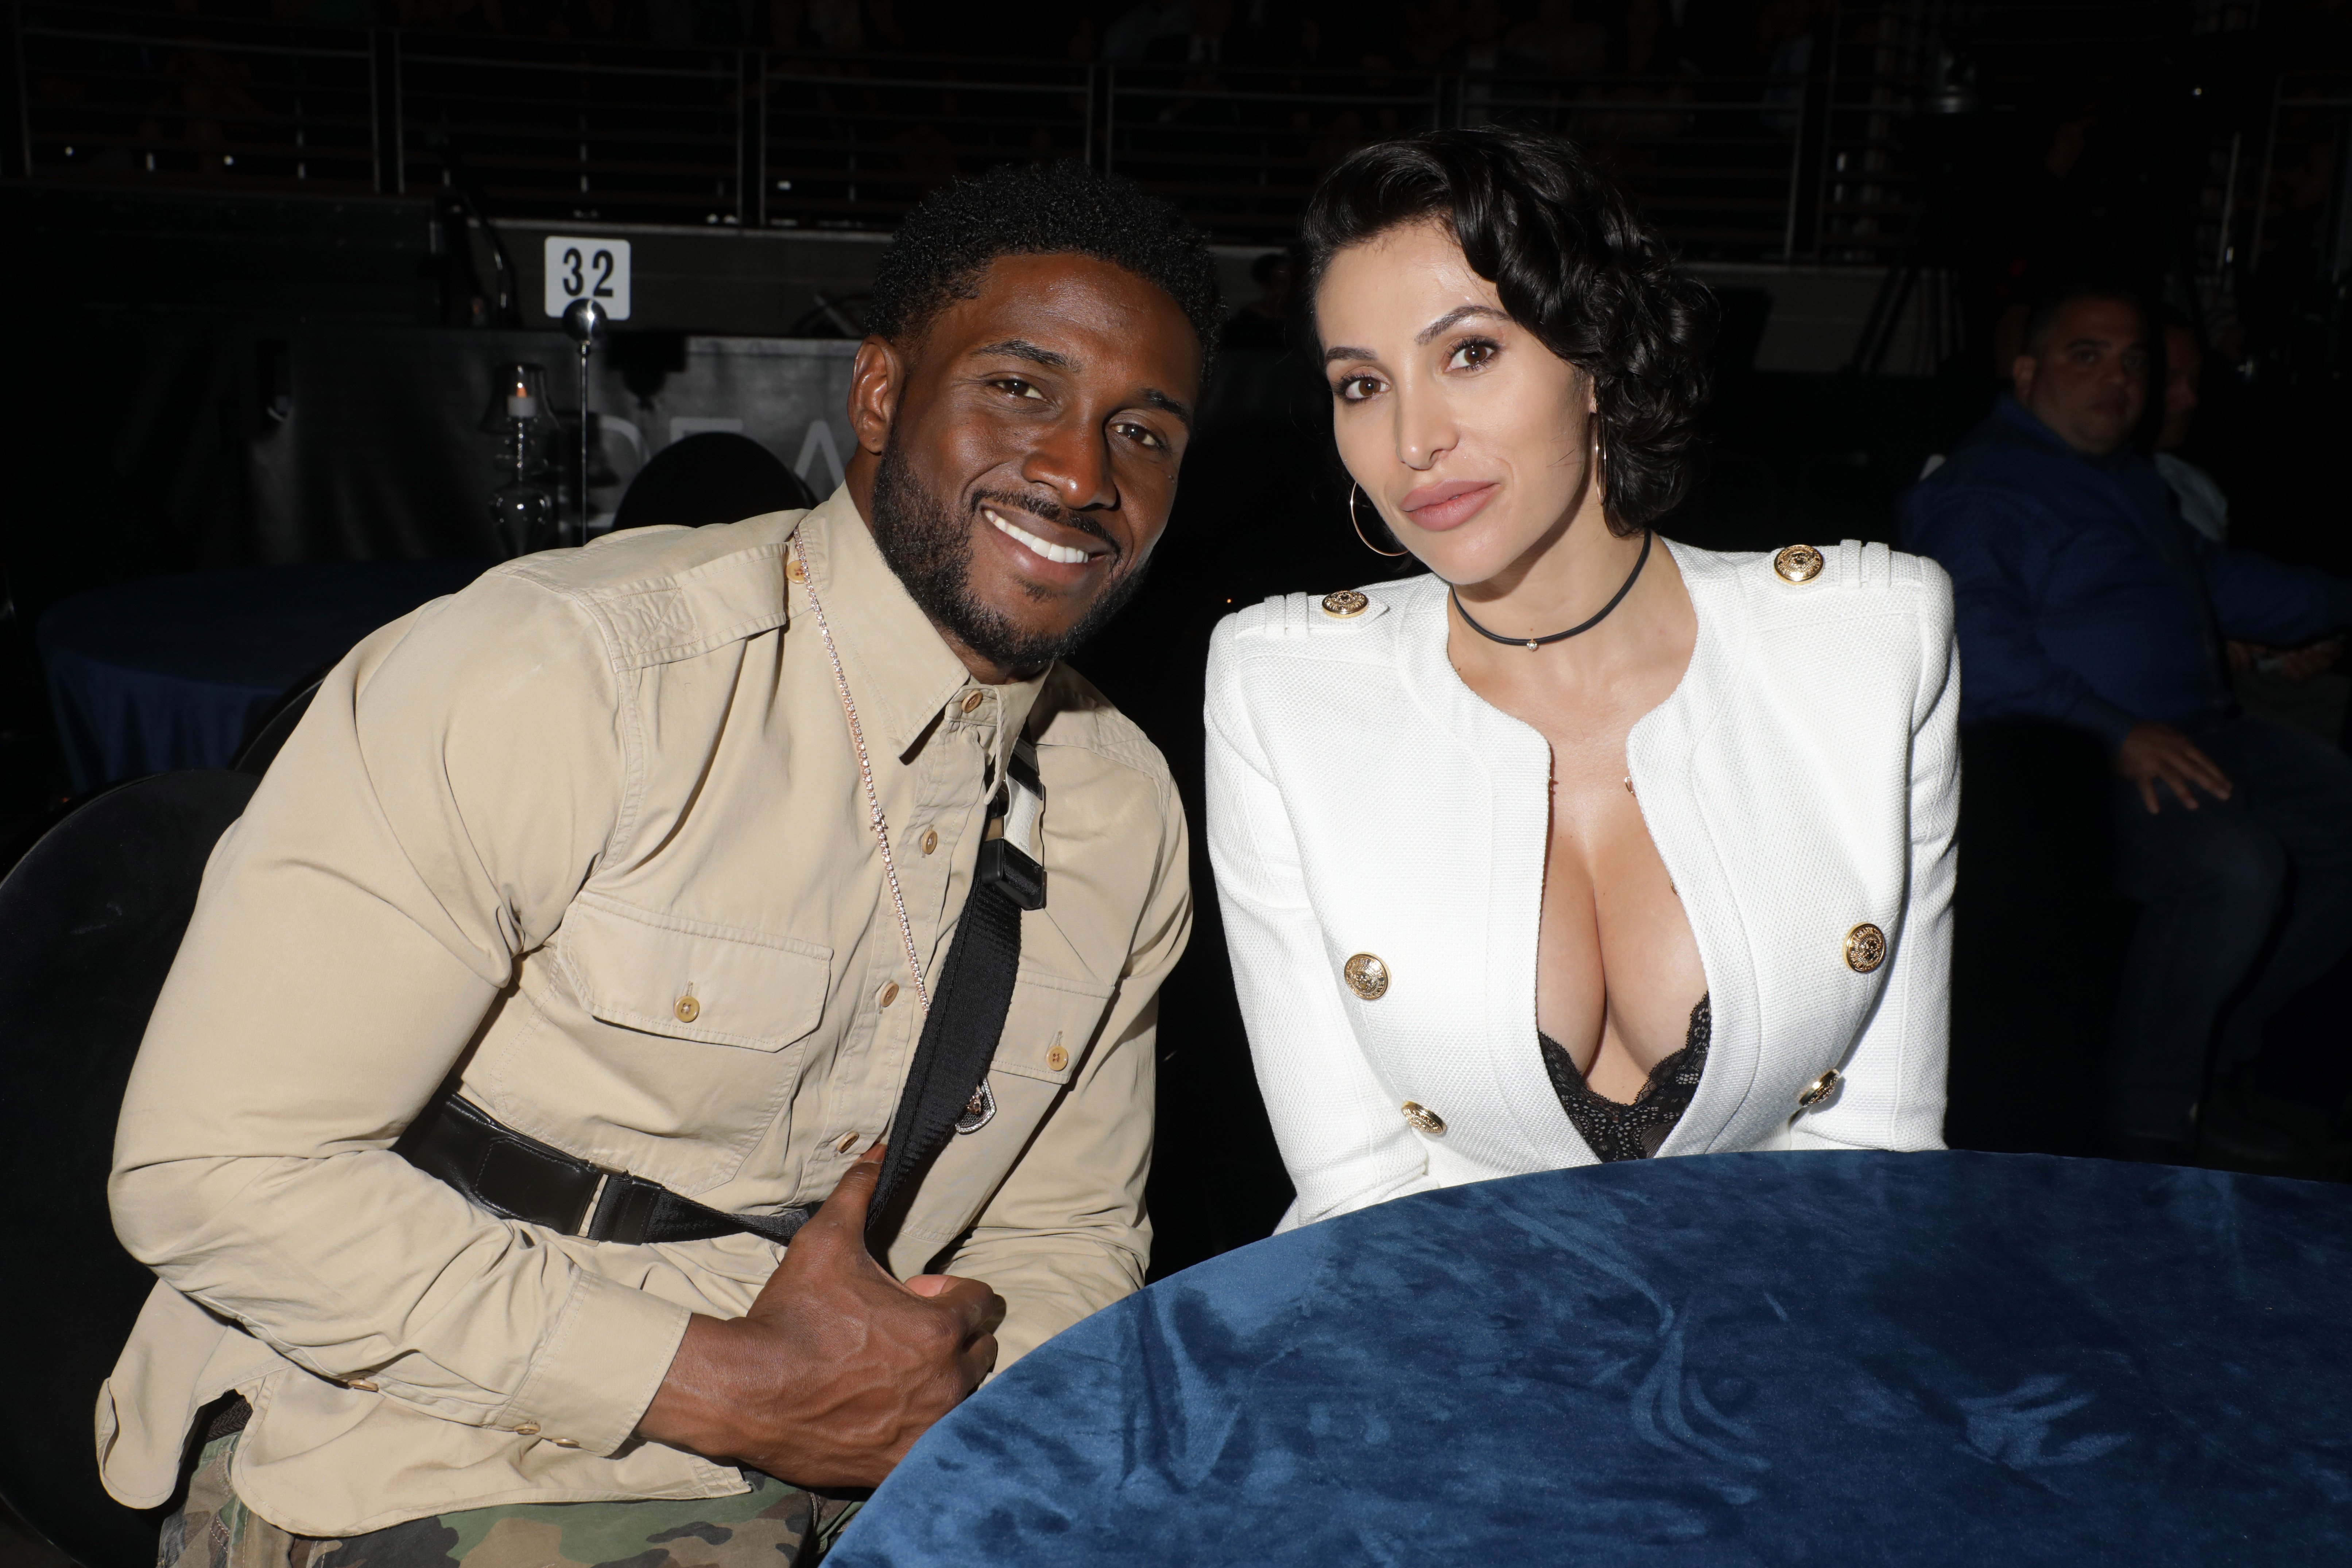 Reggie Bush and Lilit Avagyan at a concert on April 5, 2019, in Las Vegas | Source: Getty Images